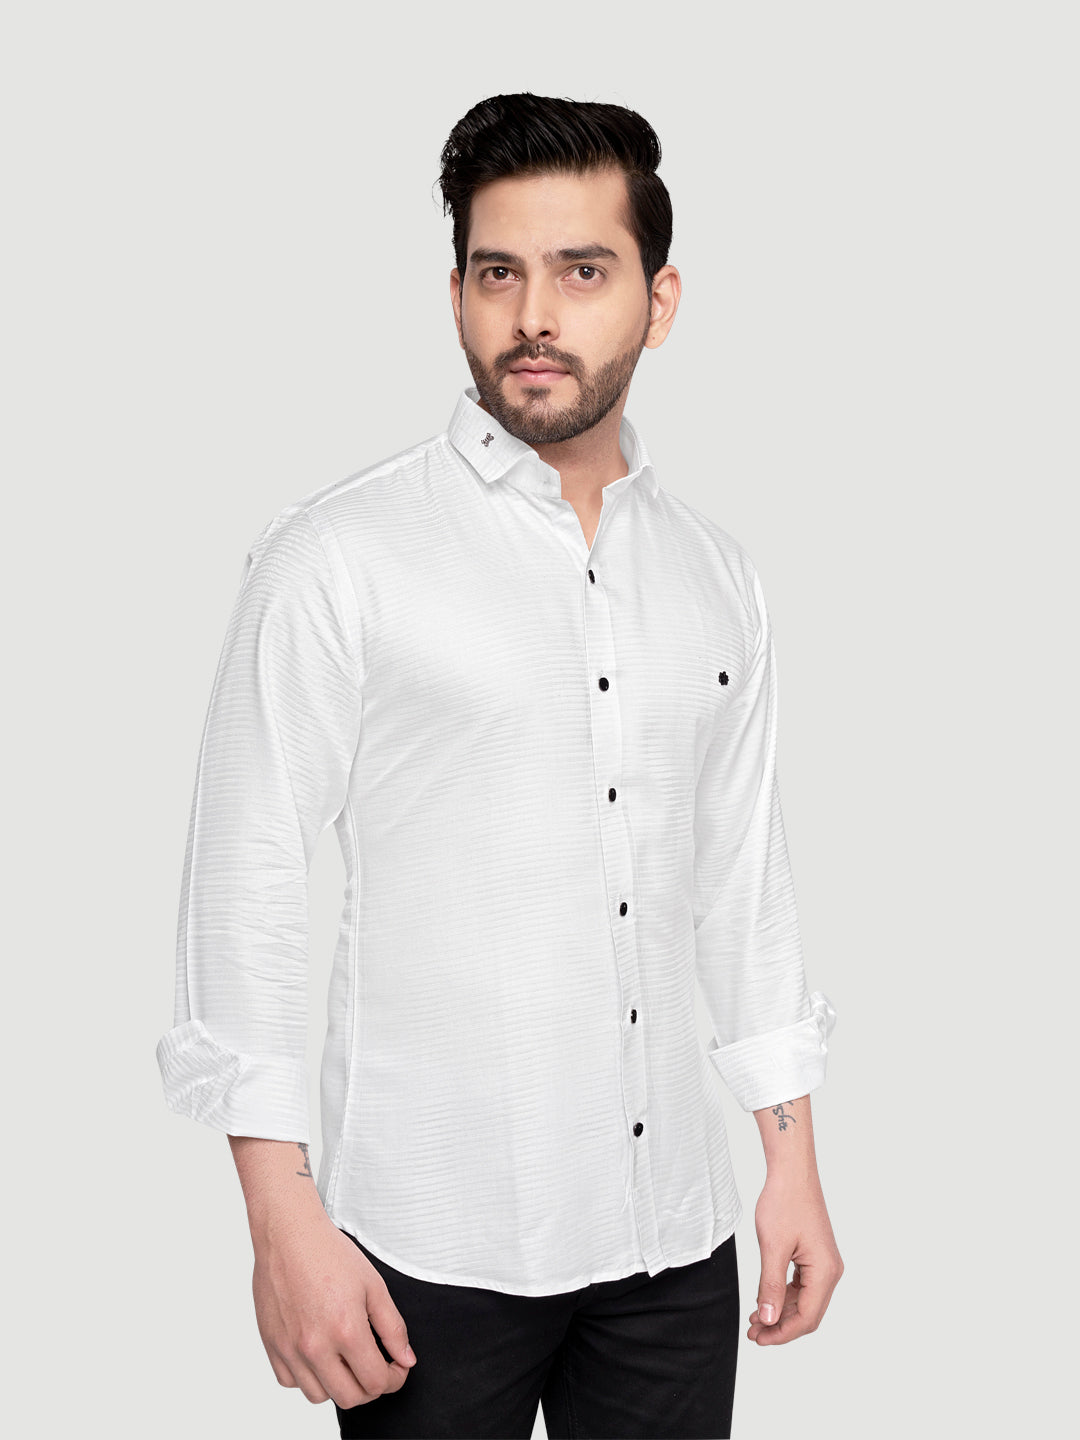 Black and White Shirts Designer Shimmer Shirt with Metal Broach White